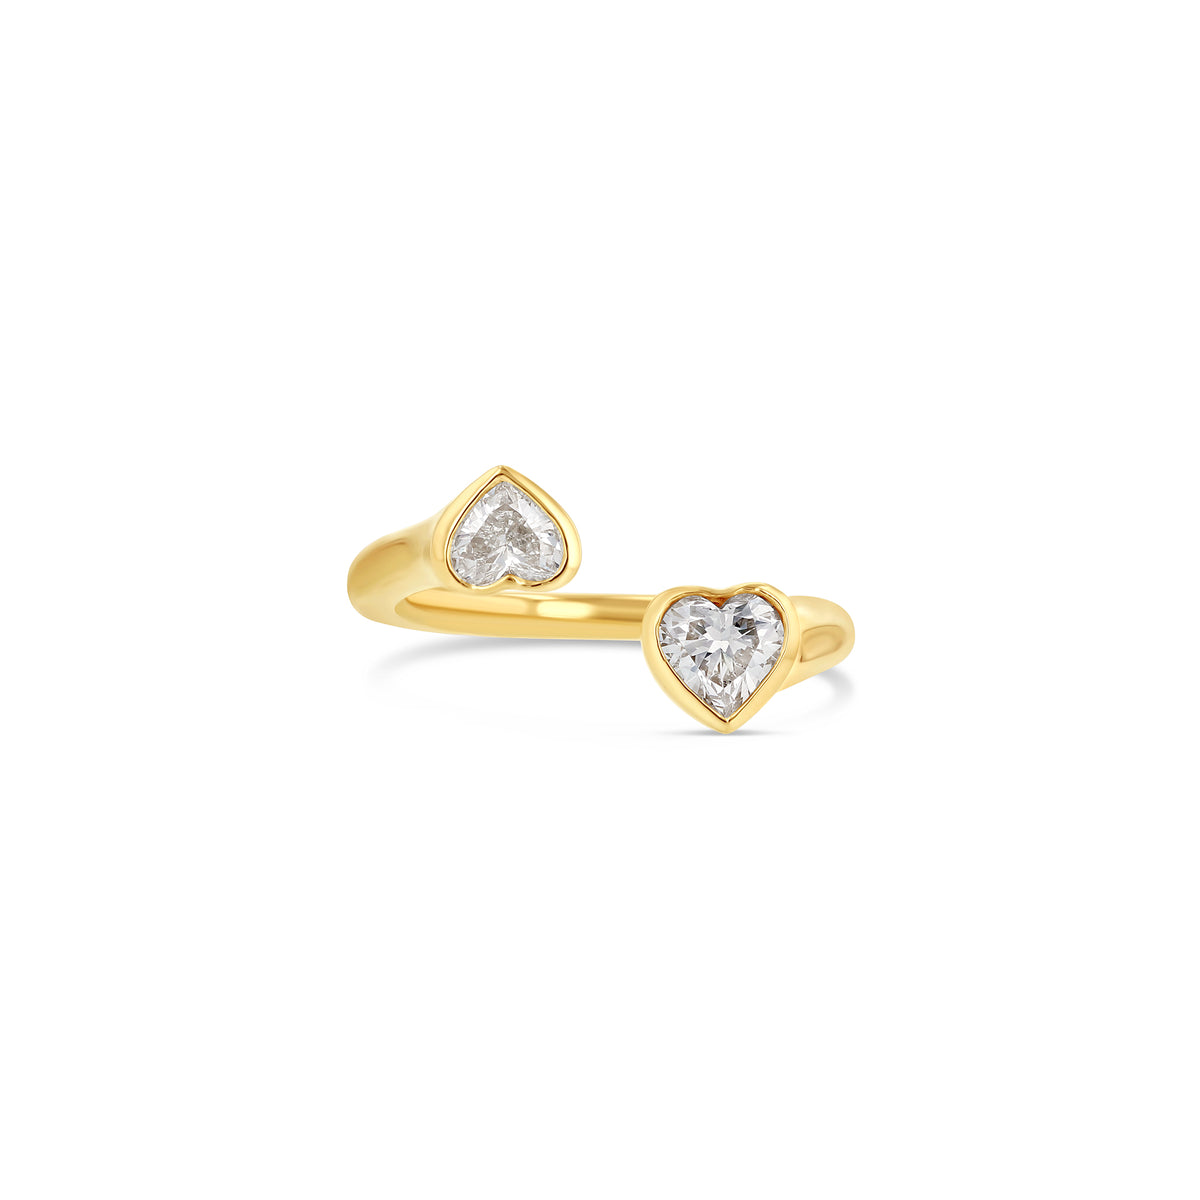 Blue Heart Solitaire Diamond Ring | Ouros Jewels